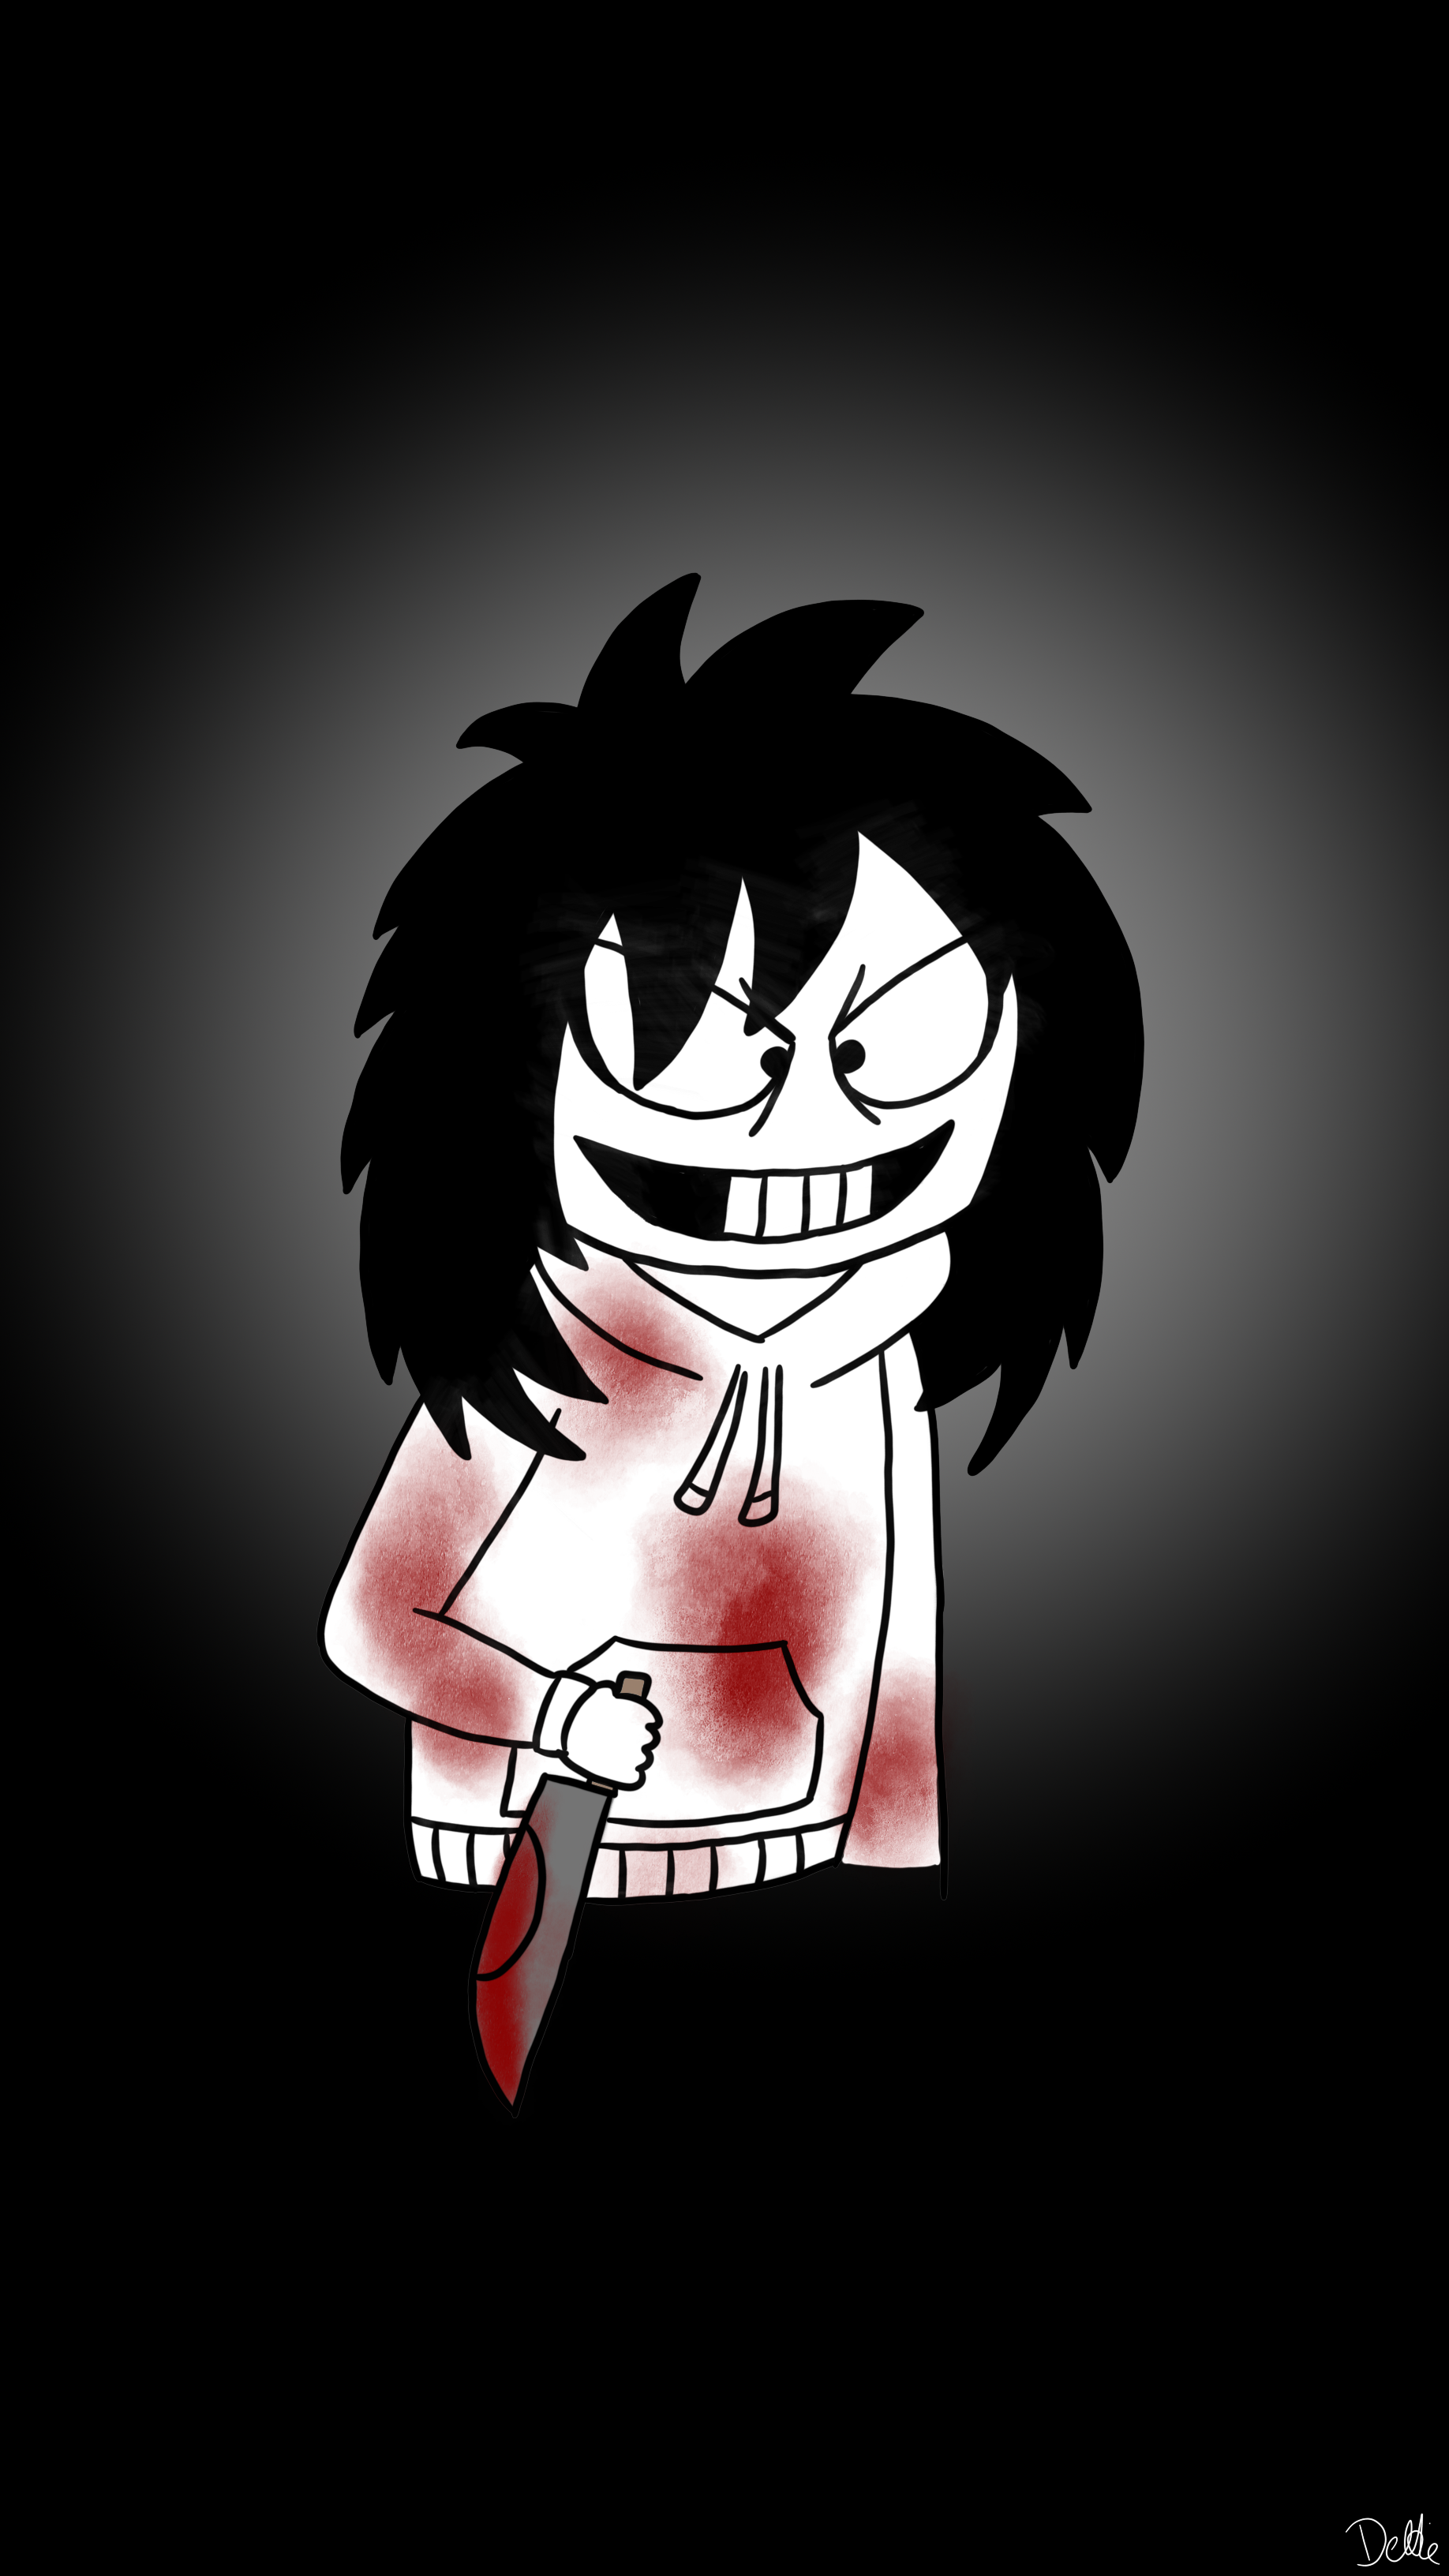 Jeff the Killer part two